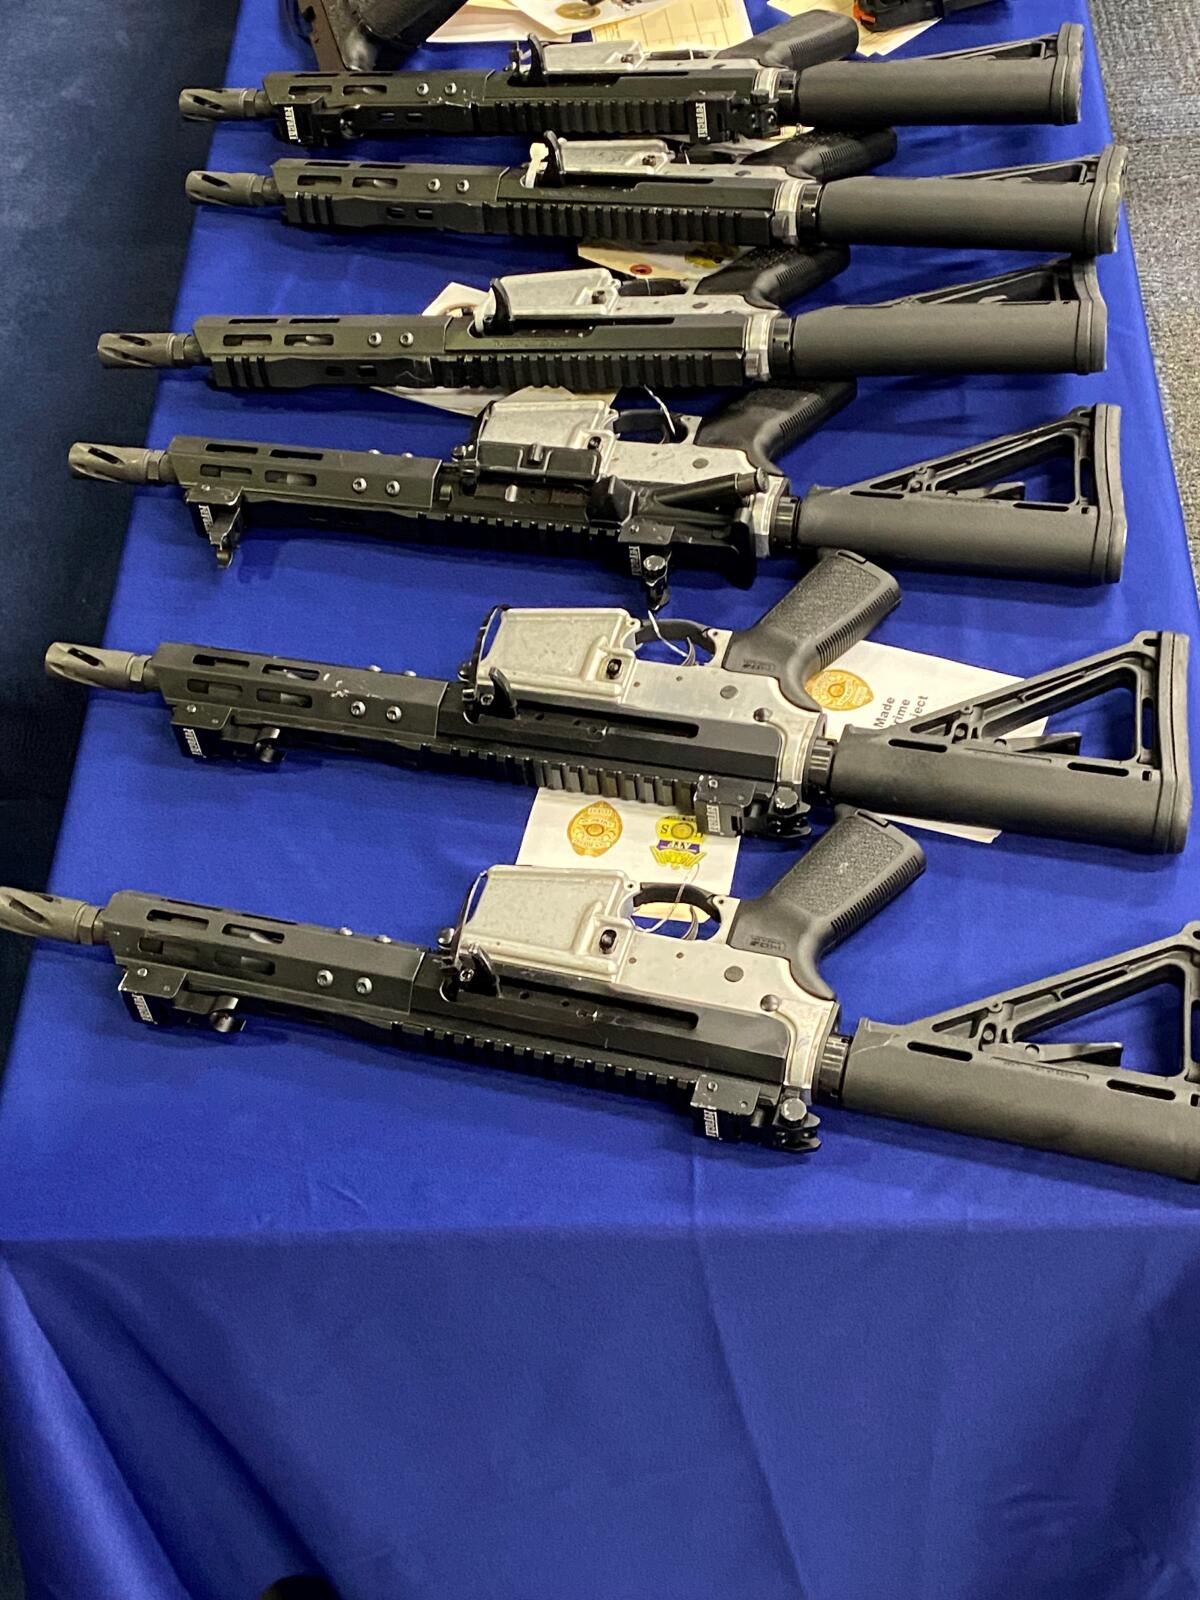 Short-barreled rifles were among the weapons displayed Wednesday during an ATF news conference about ghost guns